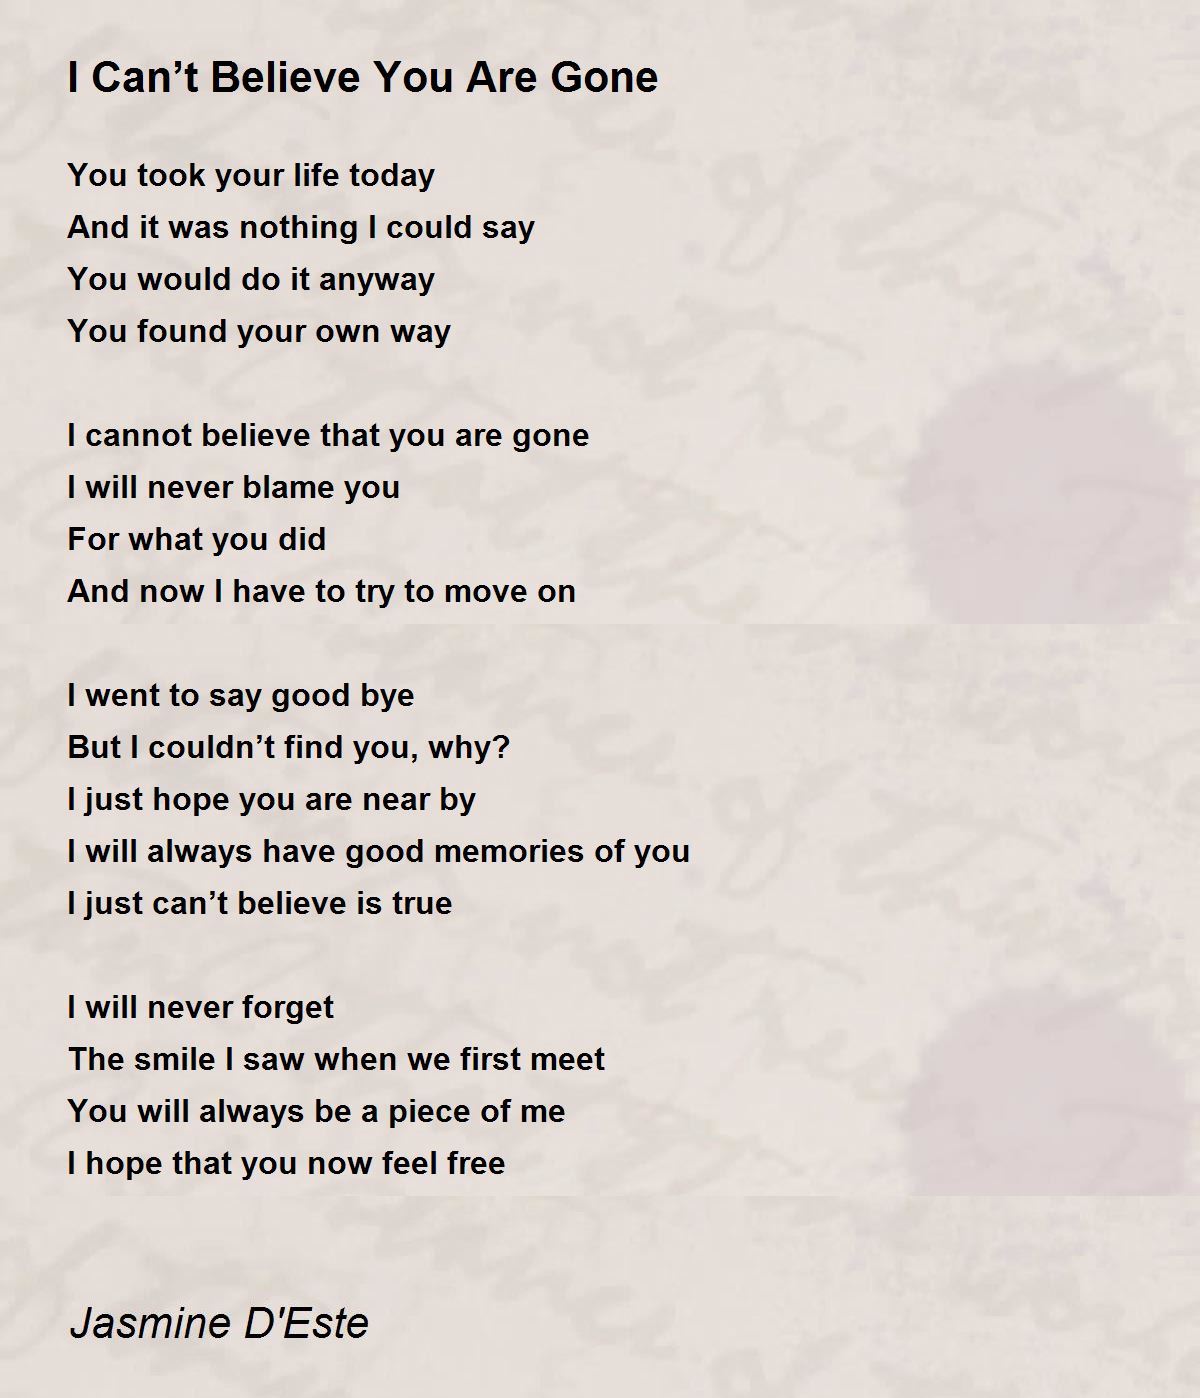 I Can't Believe You Are Gone - I Can't Believe You Are Gone Poem by Jasmine  D'Este